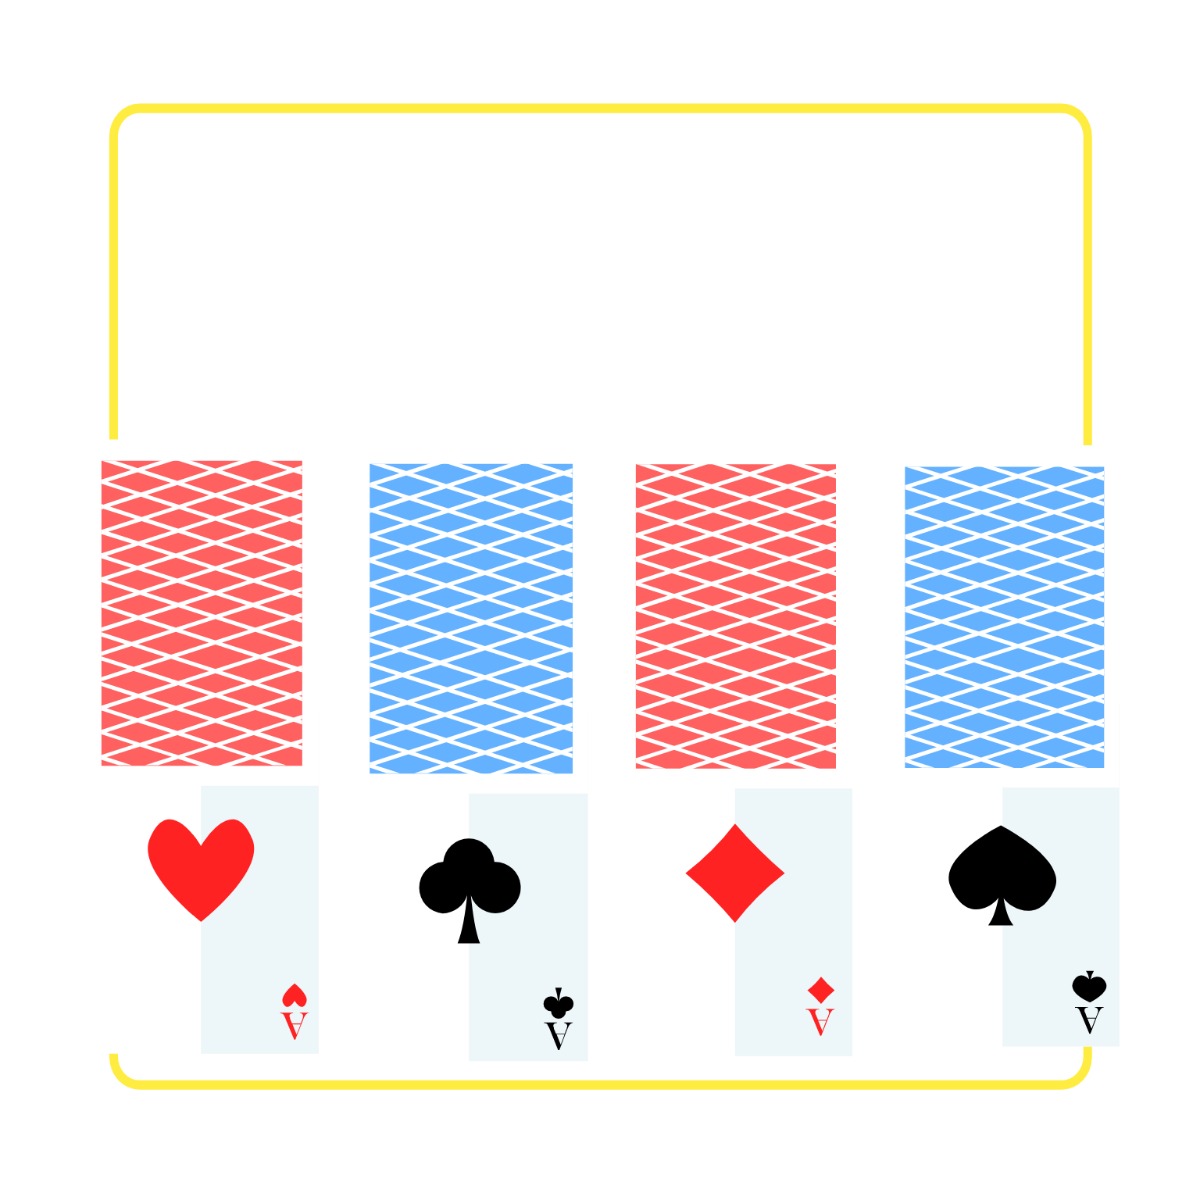 Happy National Card Playing Day Illustration